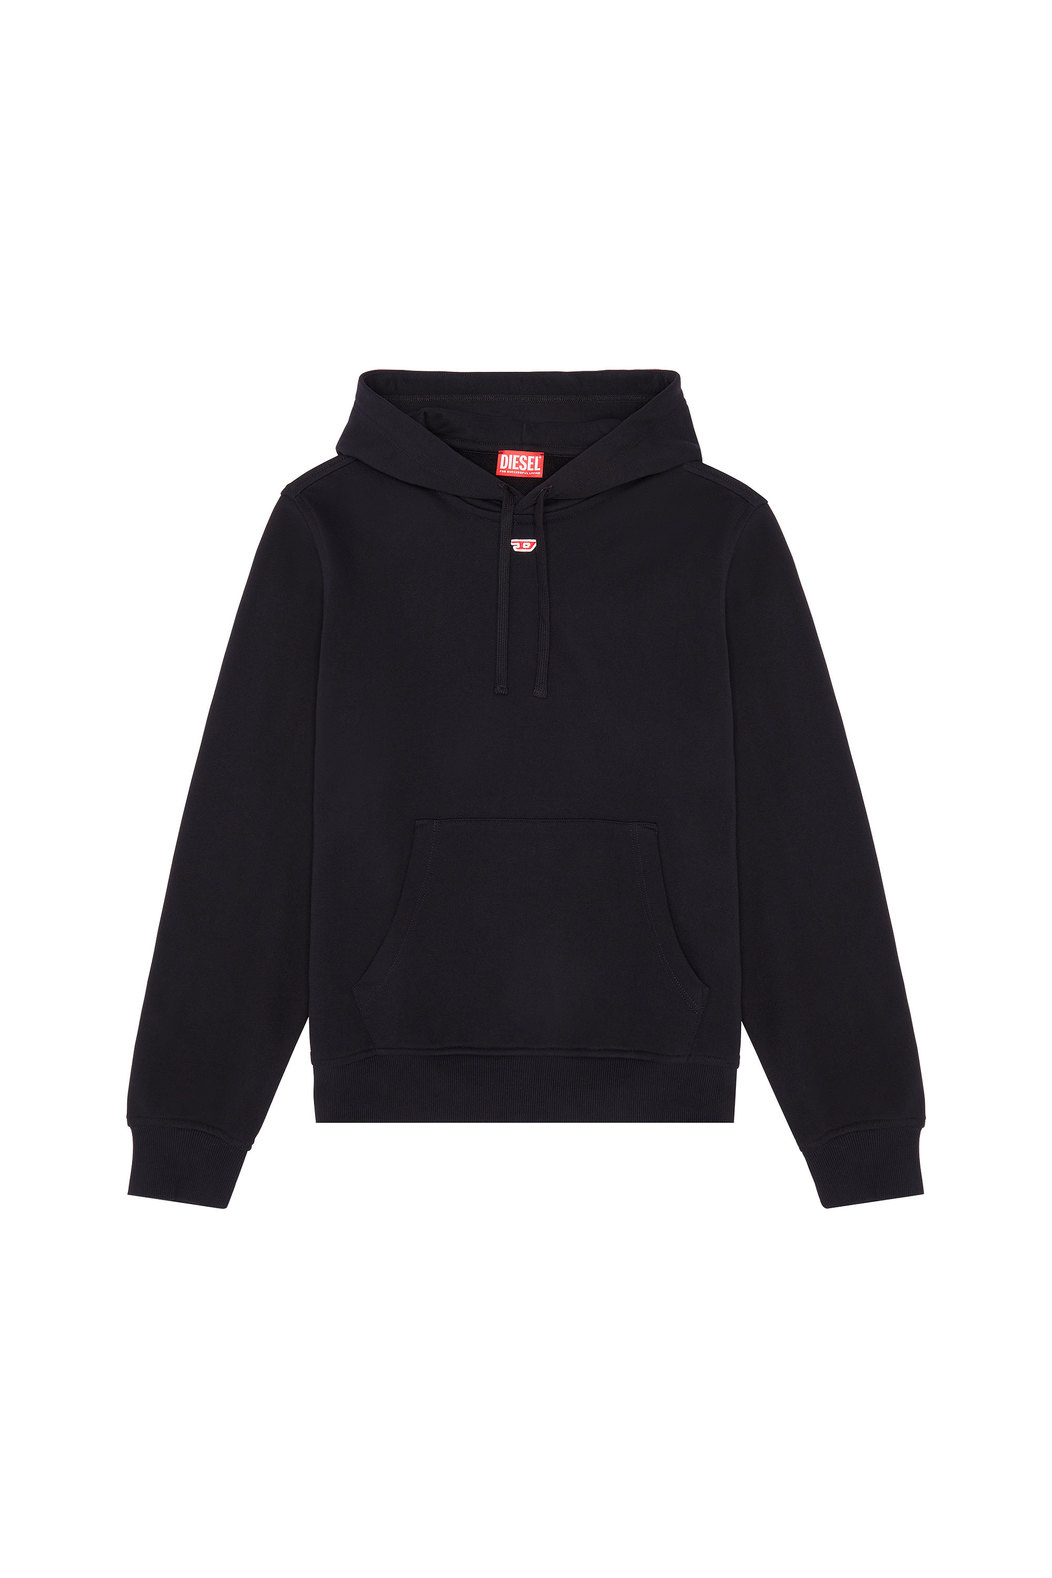 Hoodie with D logo